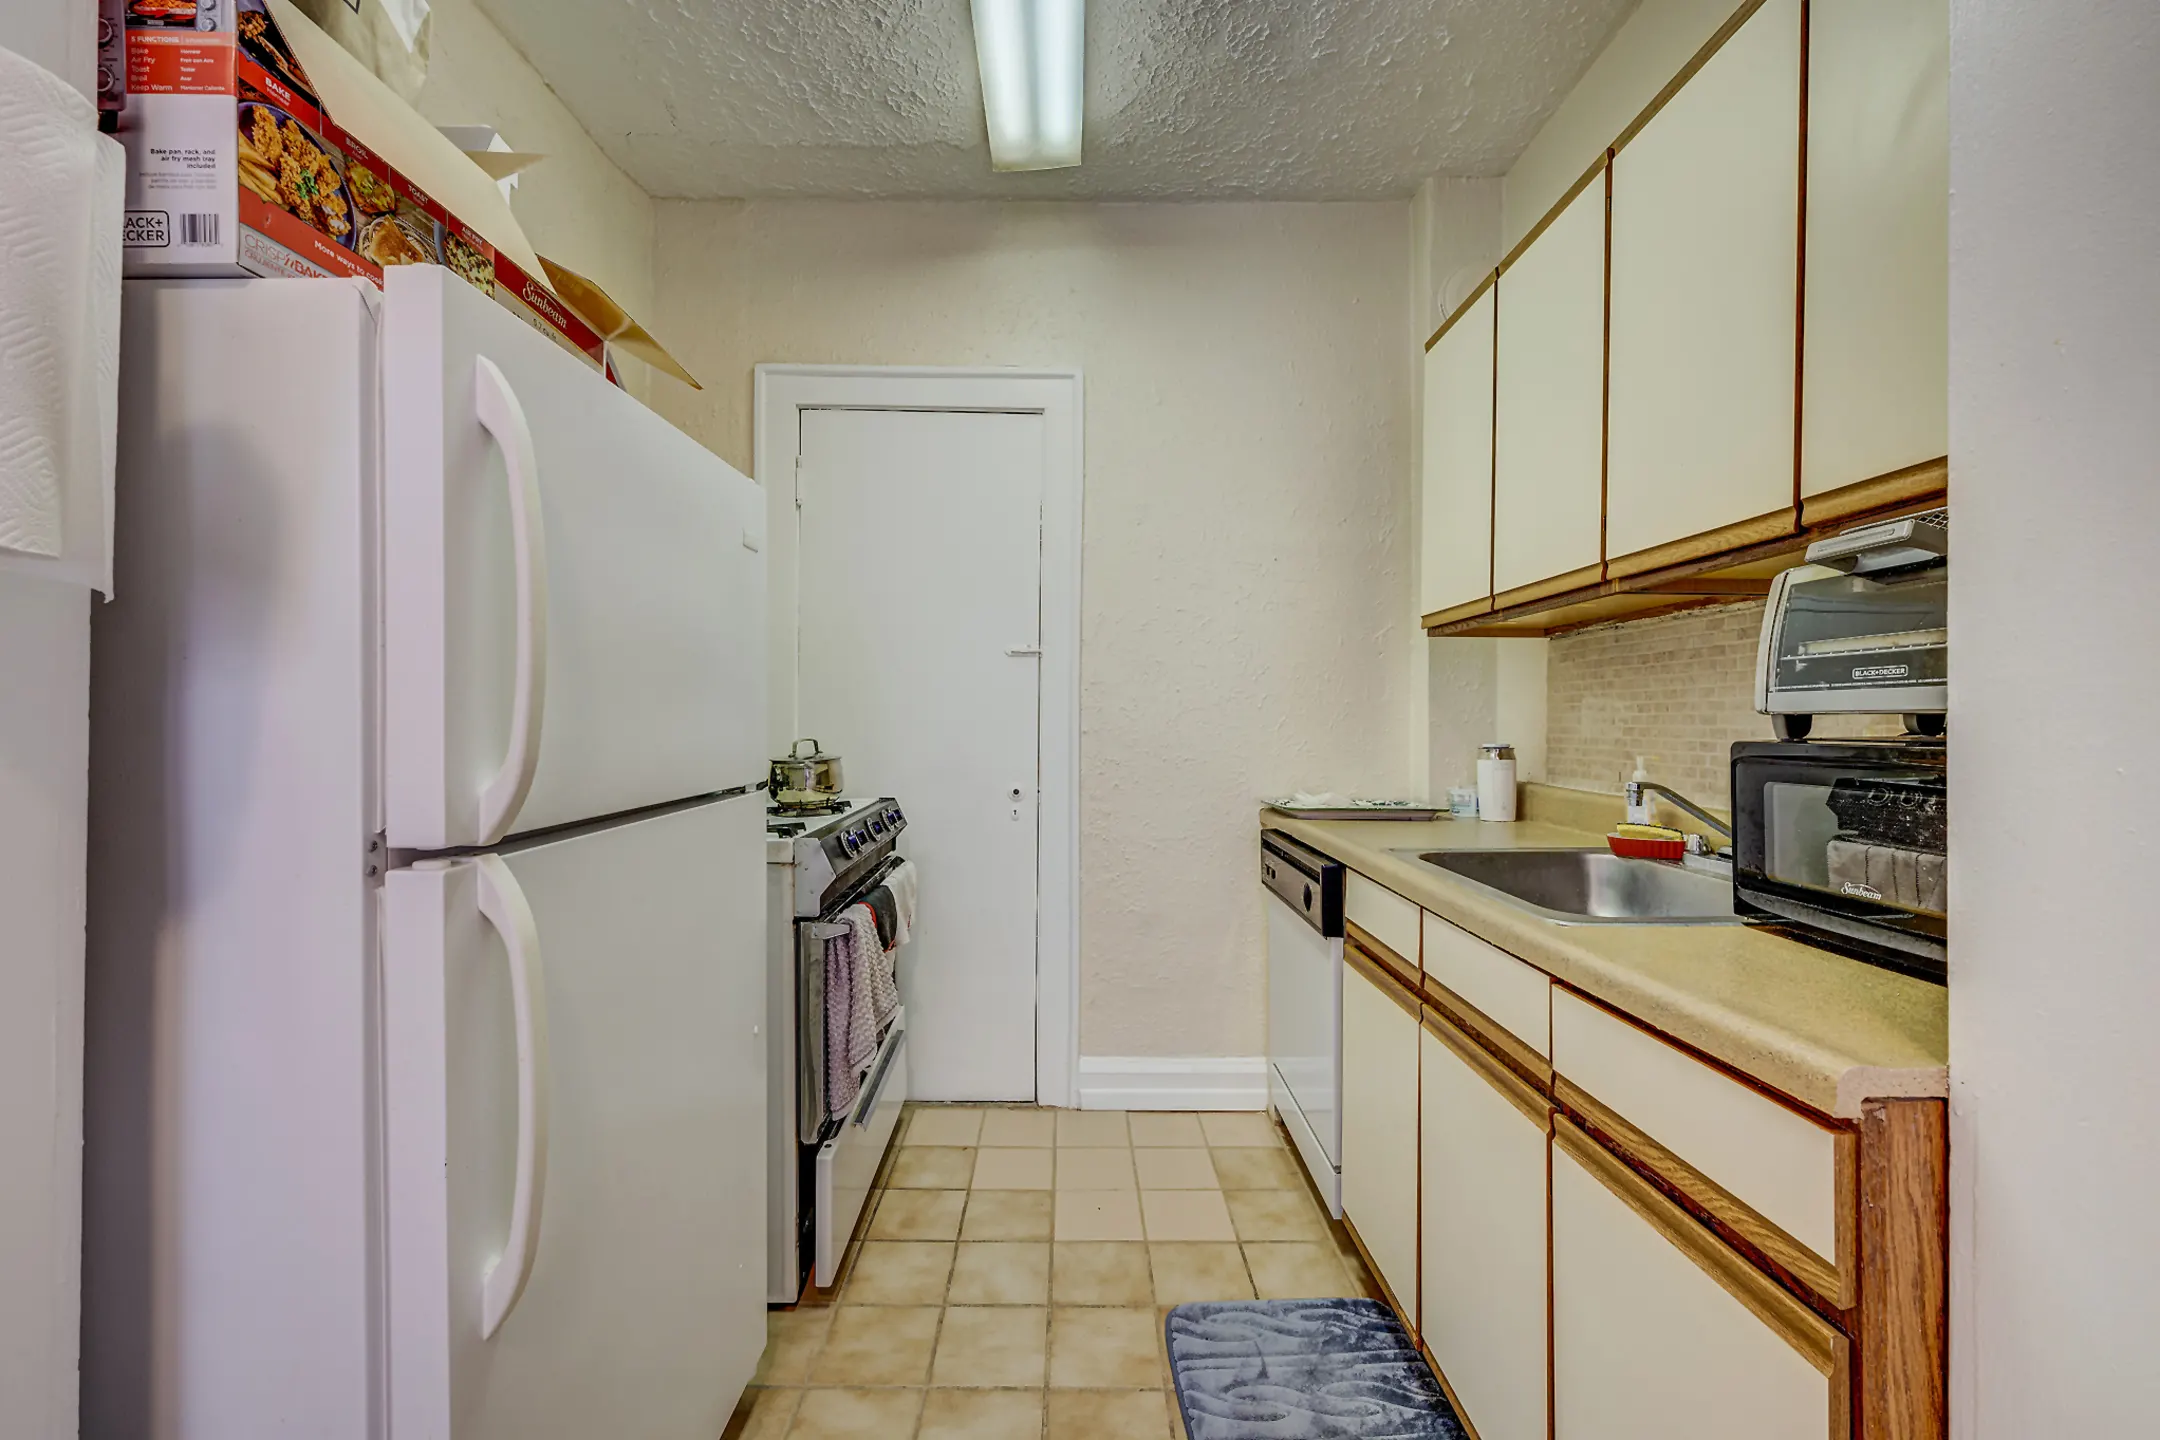 Kitchen - Heights Apartments on Overlook - Cleveland Heights, OH